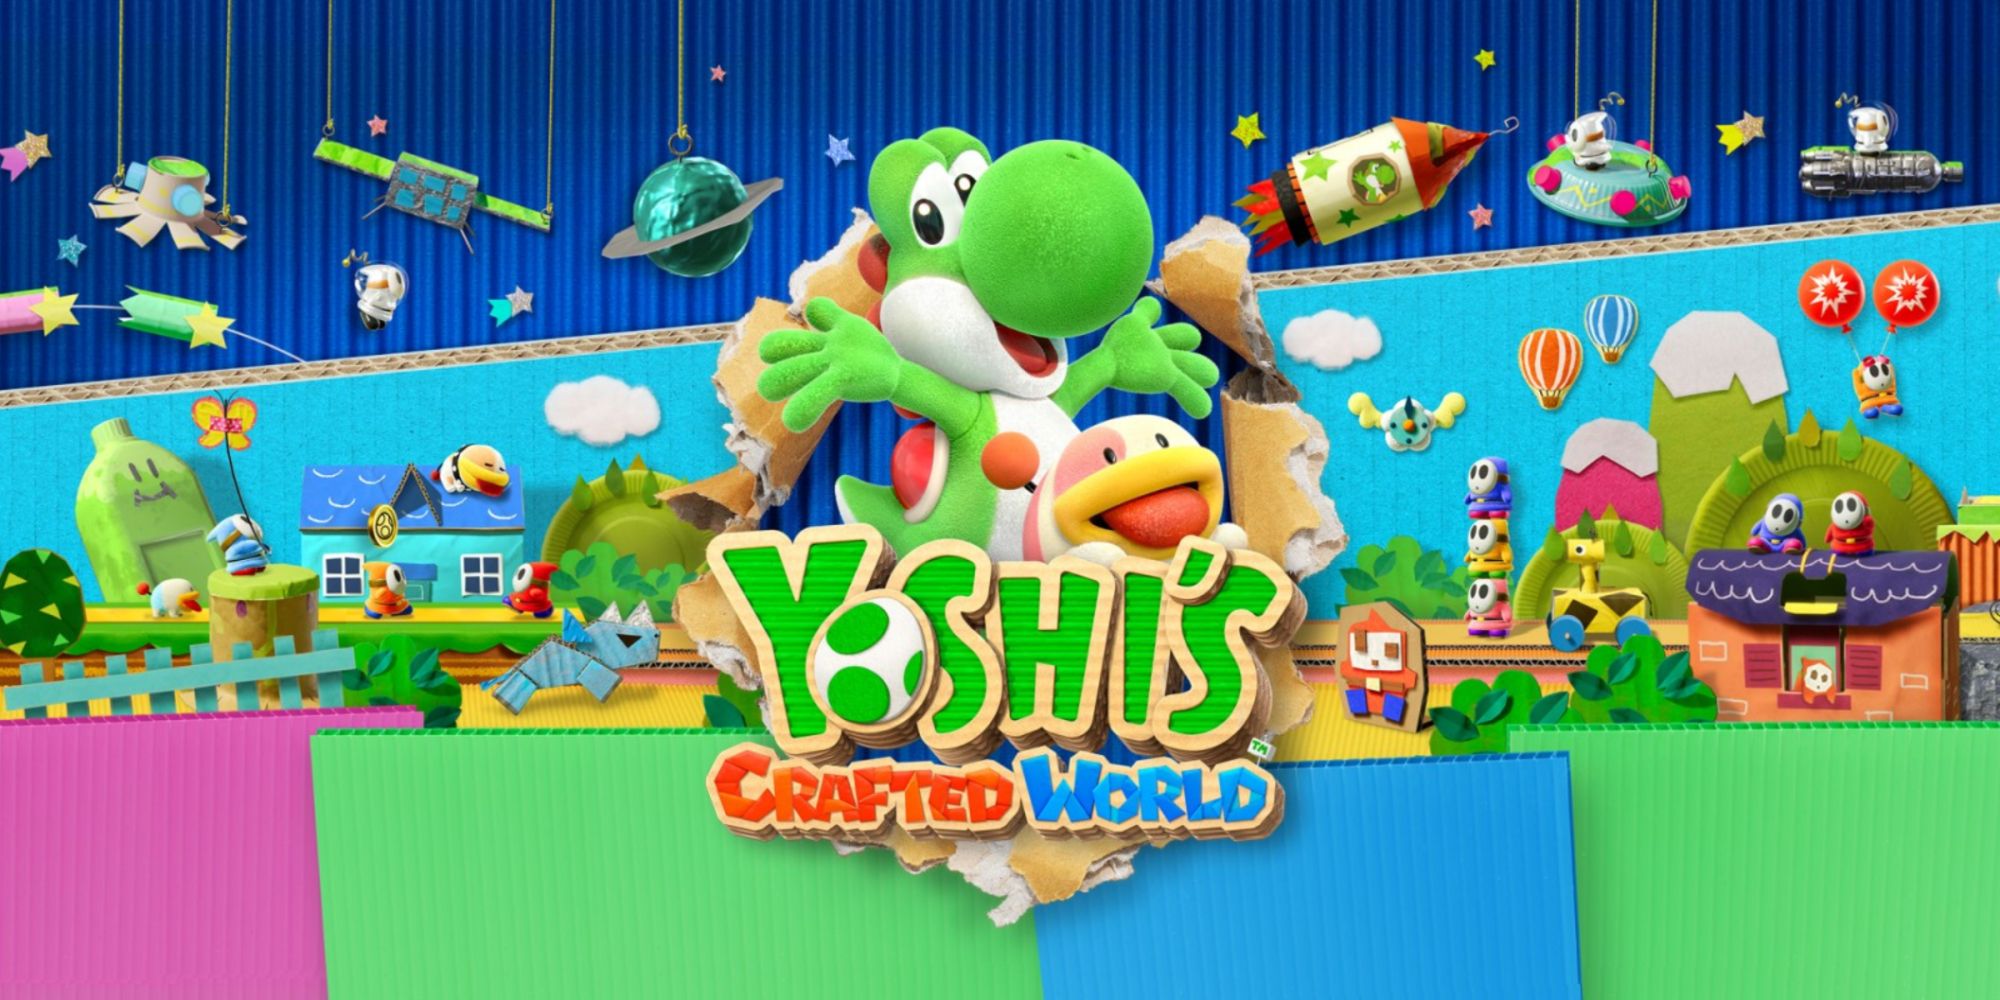 Yoshi's Crafted World - Yoshi And Poochie Surrounded By Shy Guys And Mountains